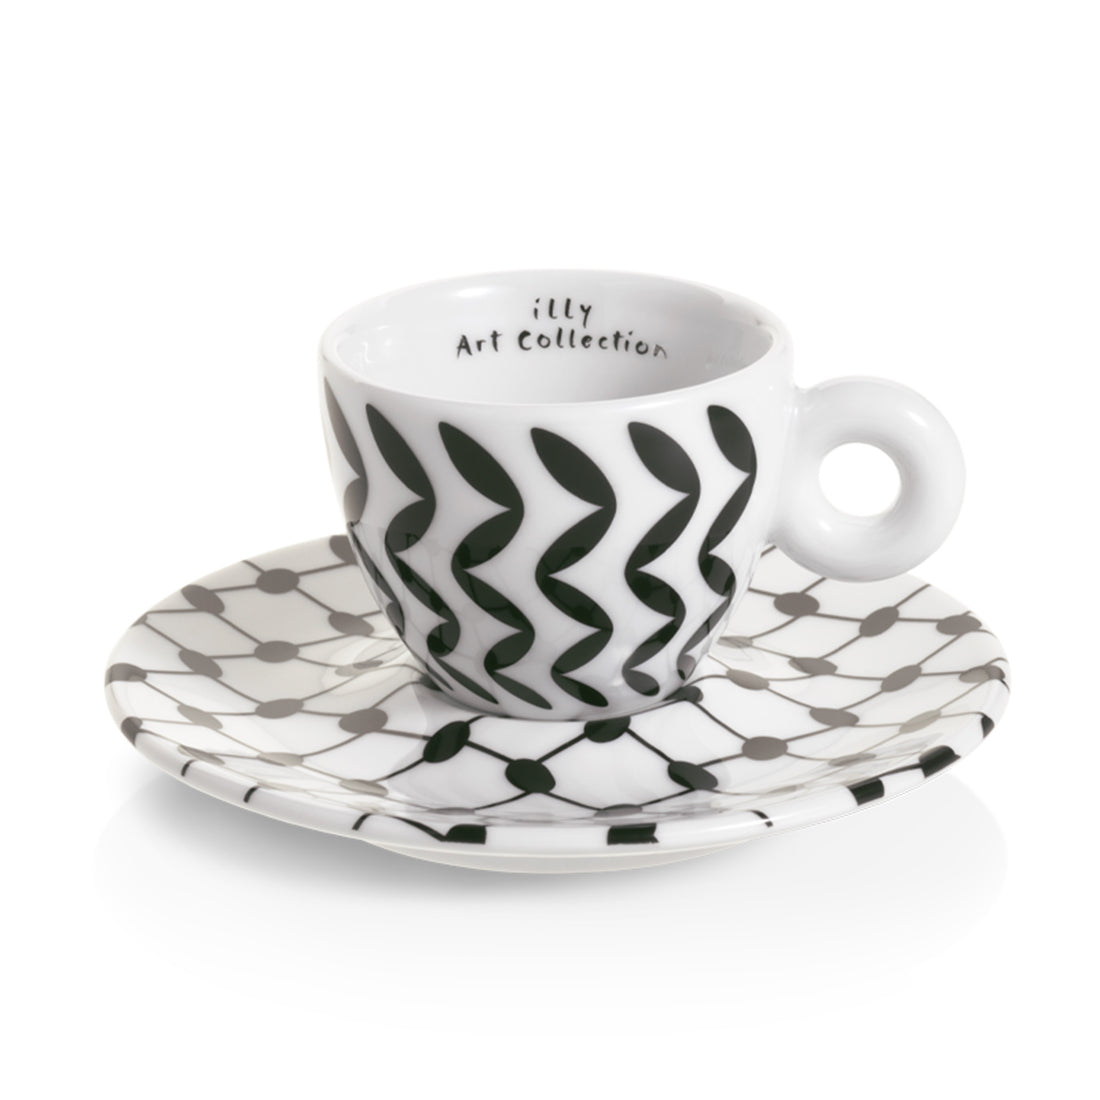 Illy Mona Hatoum Set of 2 Espresso Cups and Saucers